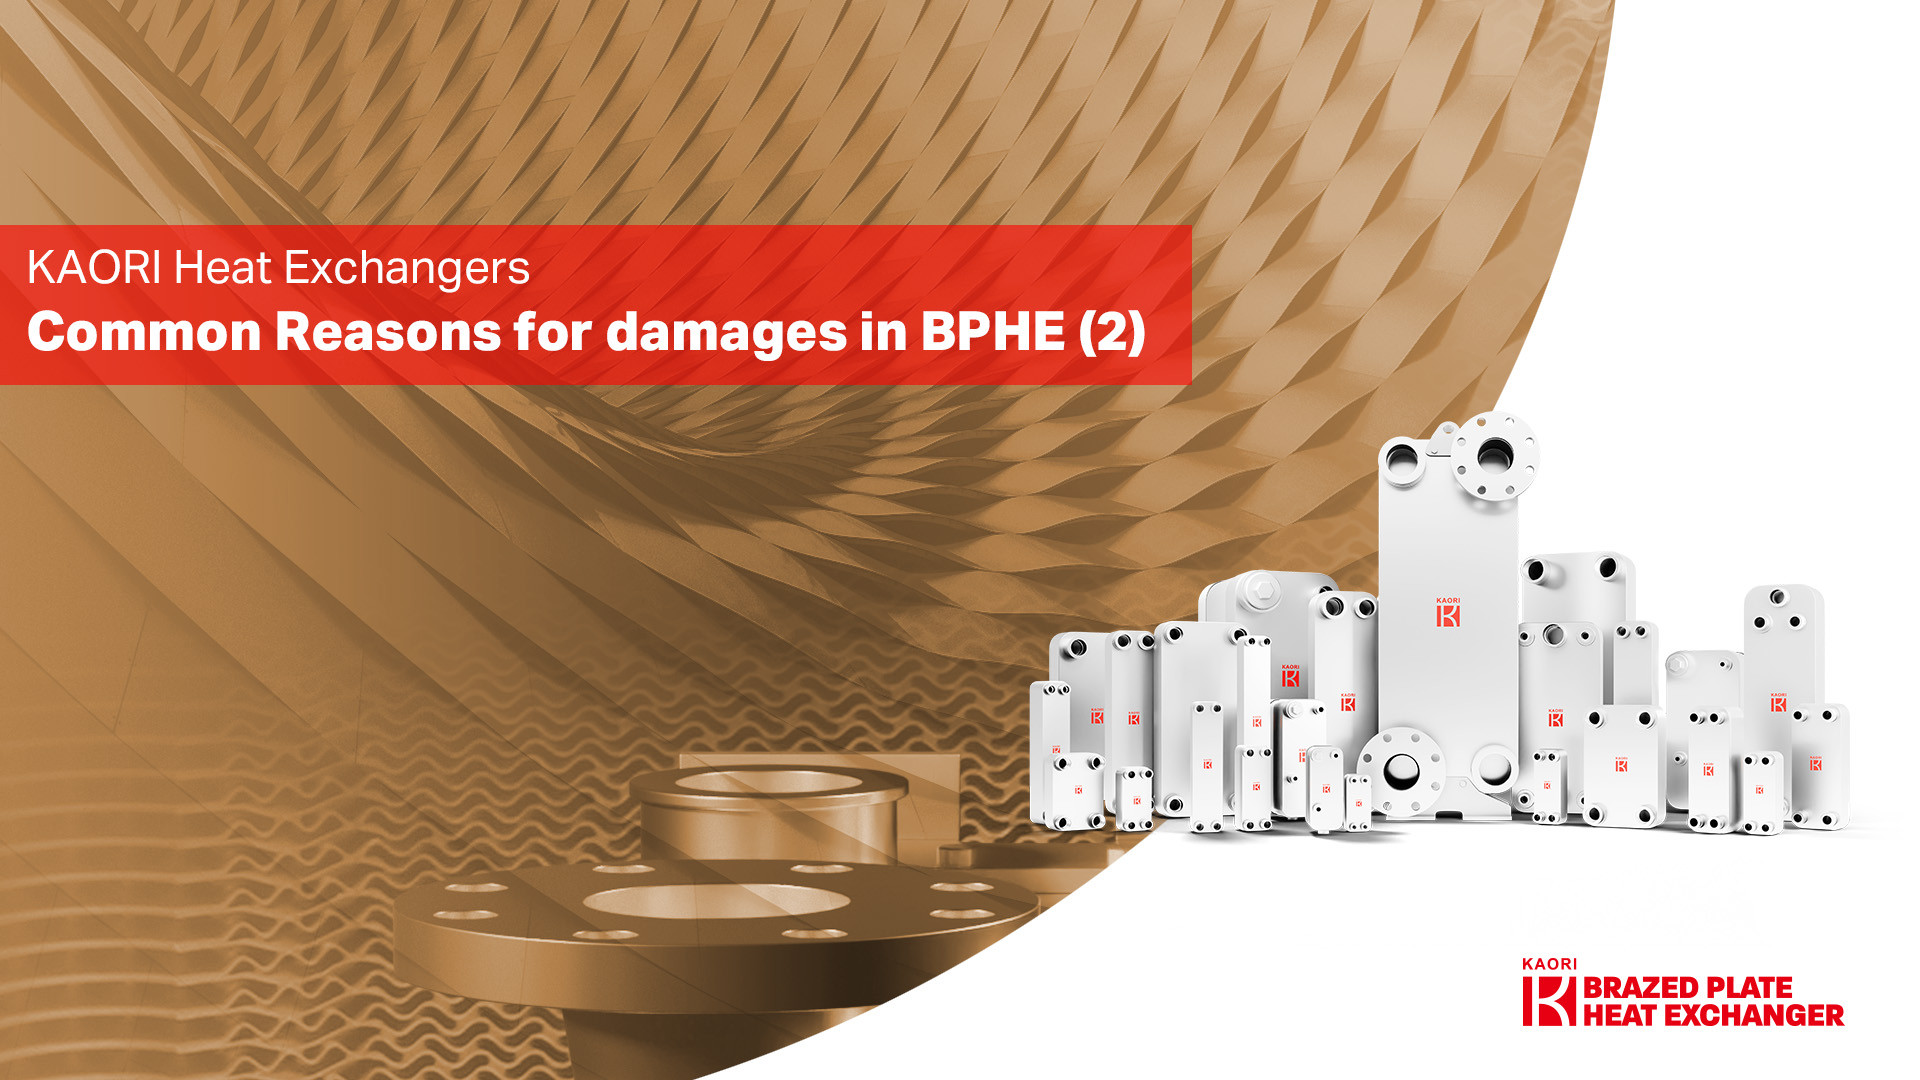  Common Reasons for Damages in BPHEs- (2) Corrosion 